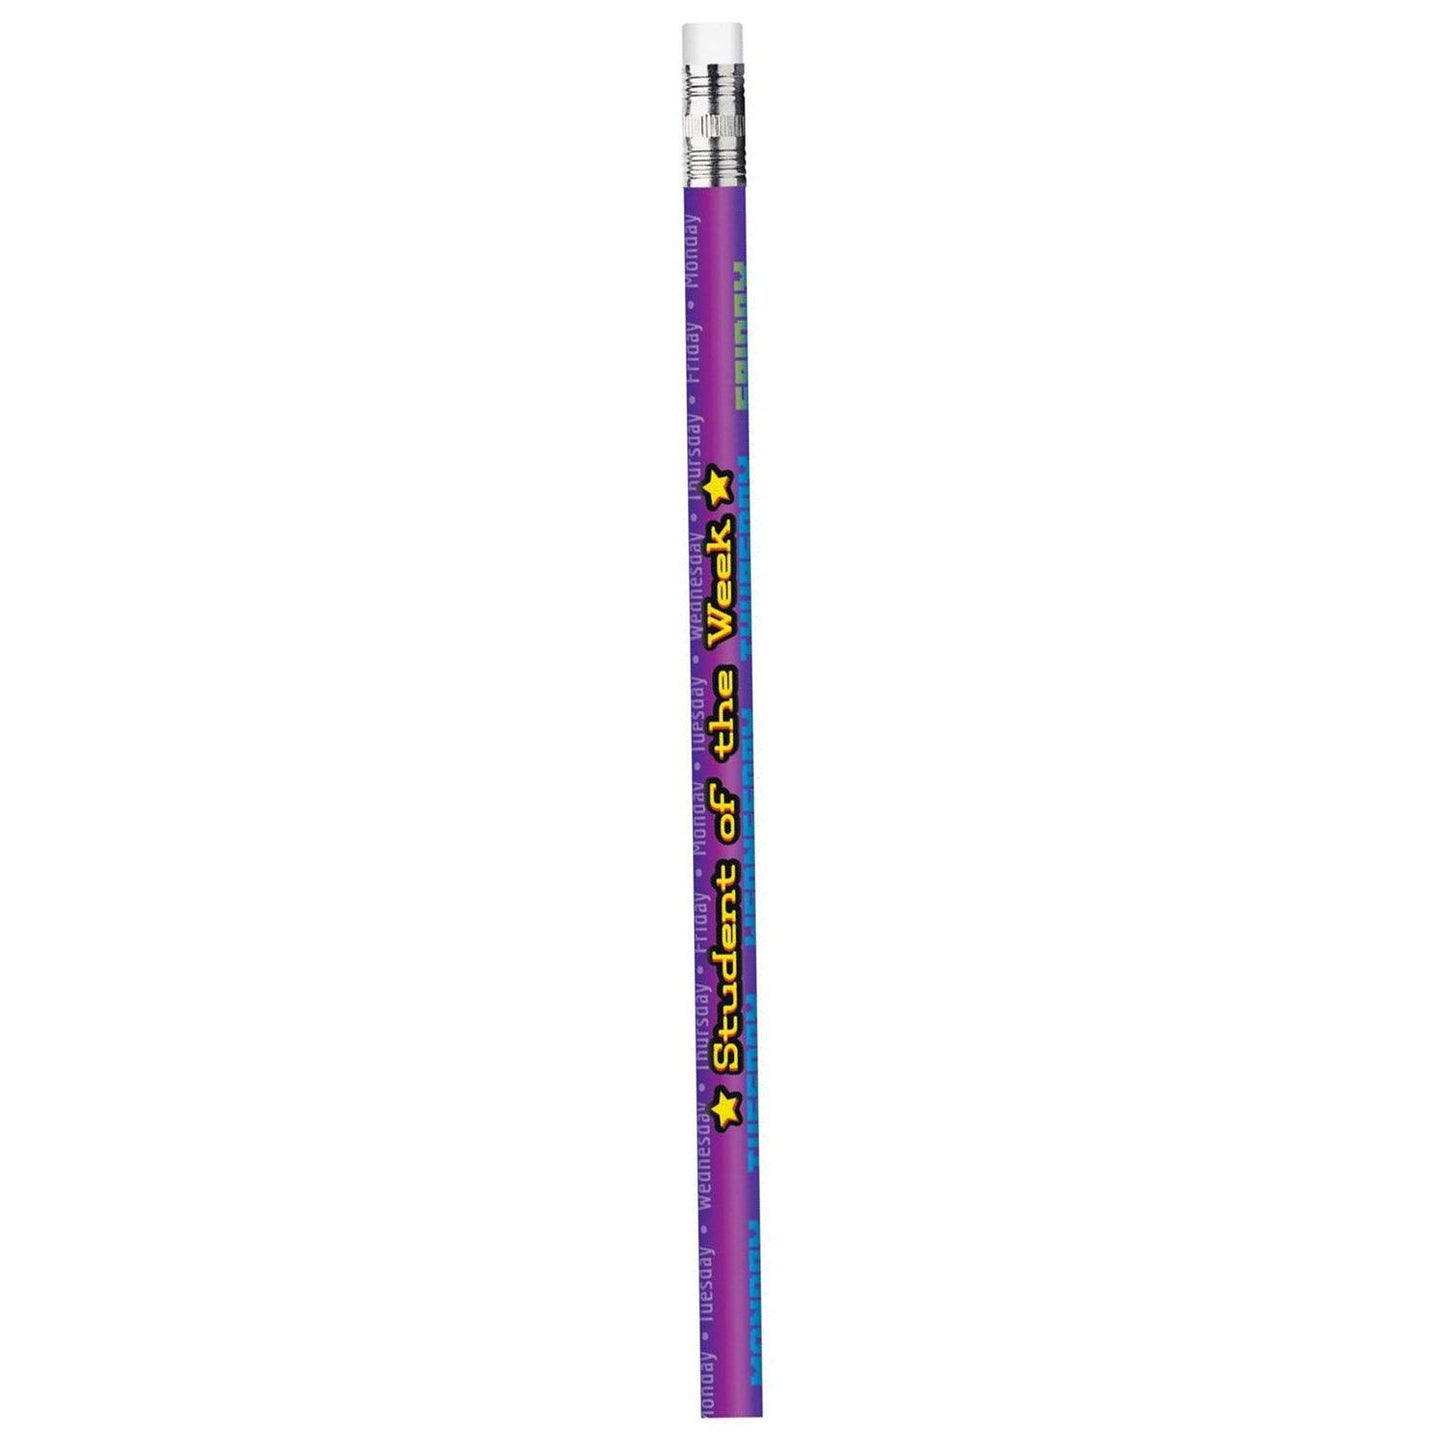 Student of the Week Pencil, Pack of 144 - Loomini